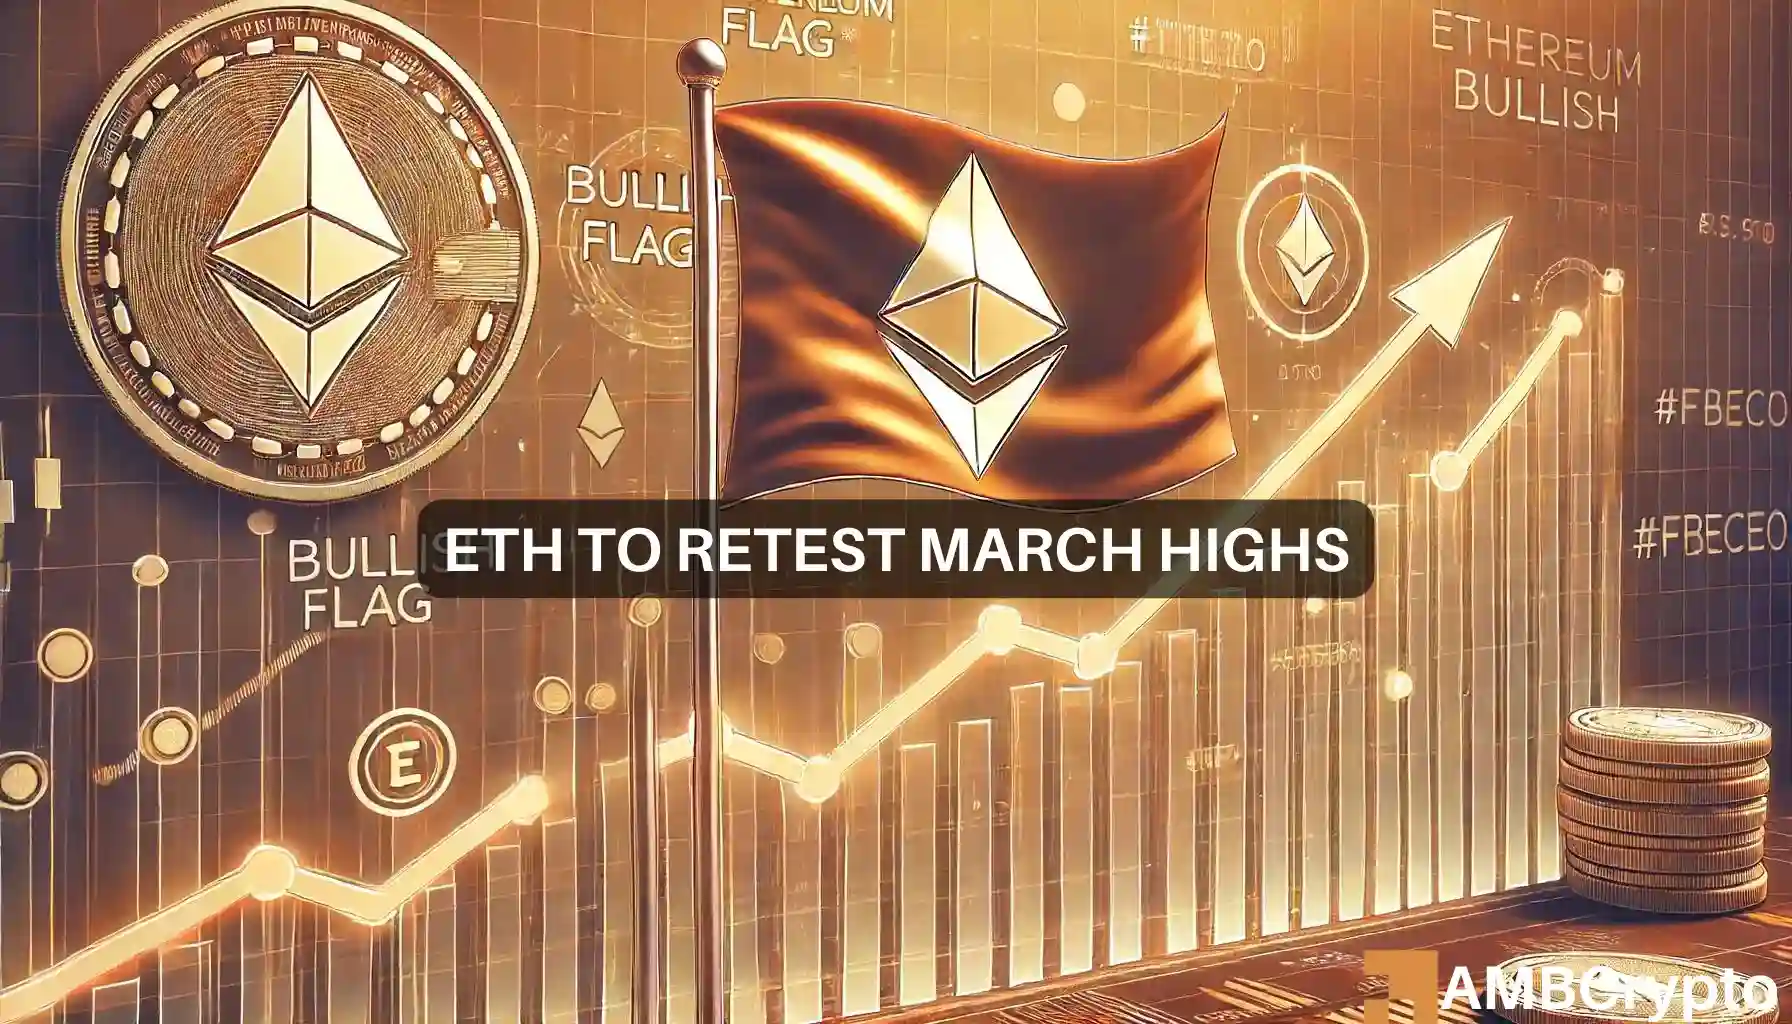 Ethereum’s bullish flag: A signal for investors to prepare for gains?